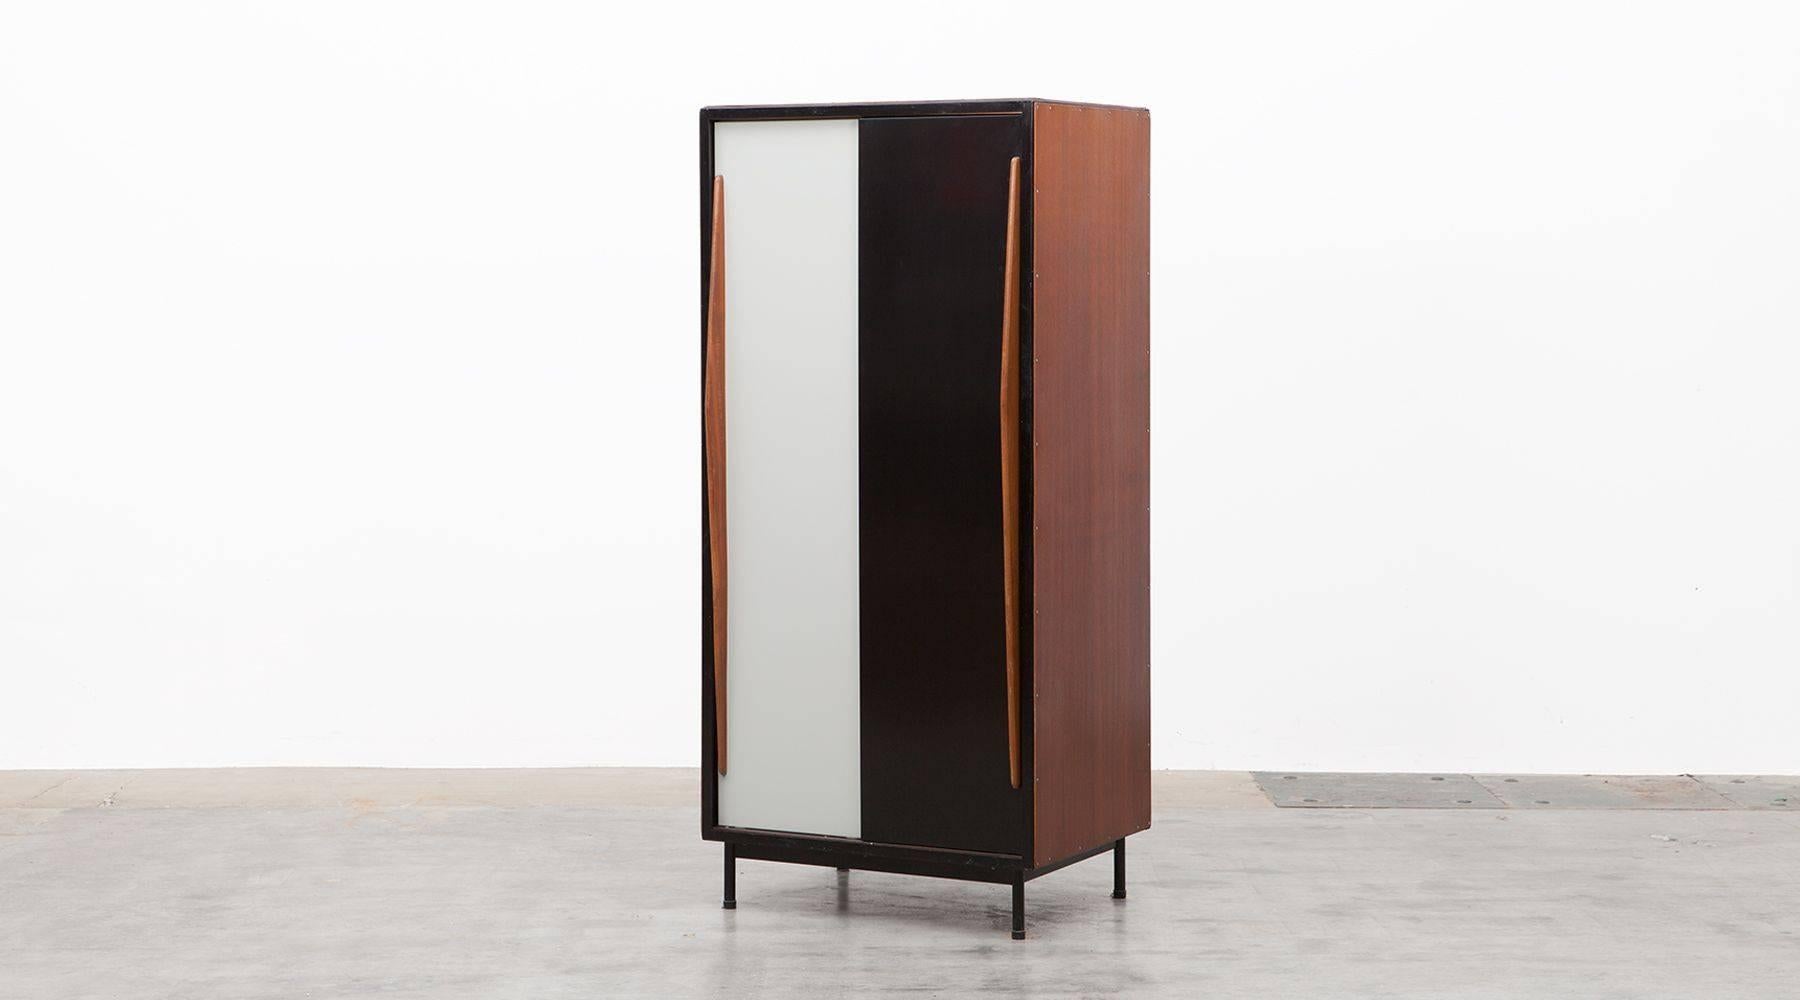 This 1952 standing cabinet with lacquered metal doors in black and light grey and wooden door handles slides from left and right. Designed by Willy van der Meeren. The wardrobe on one side is complimented by two shelves on the other side. It is a